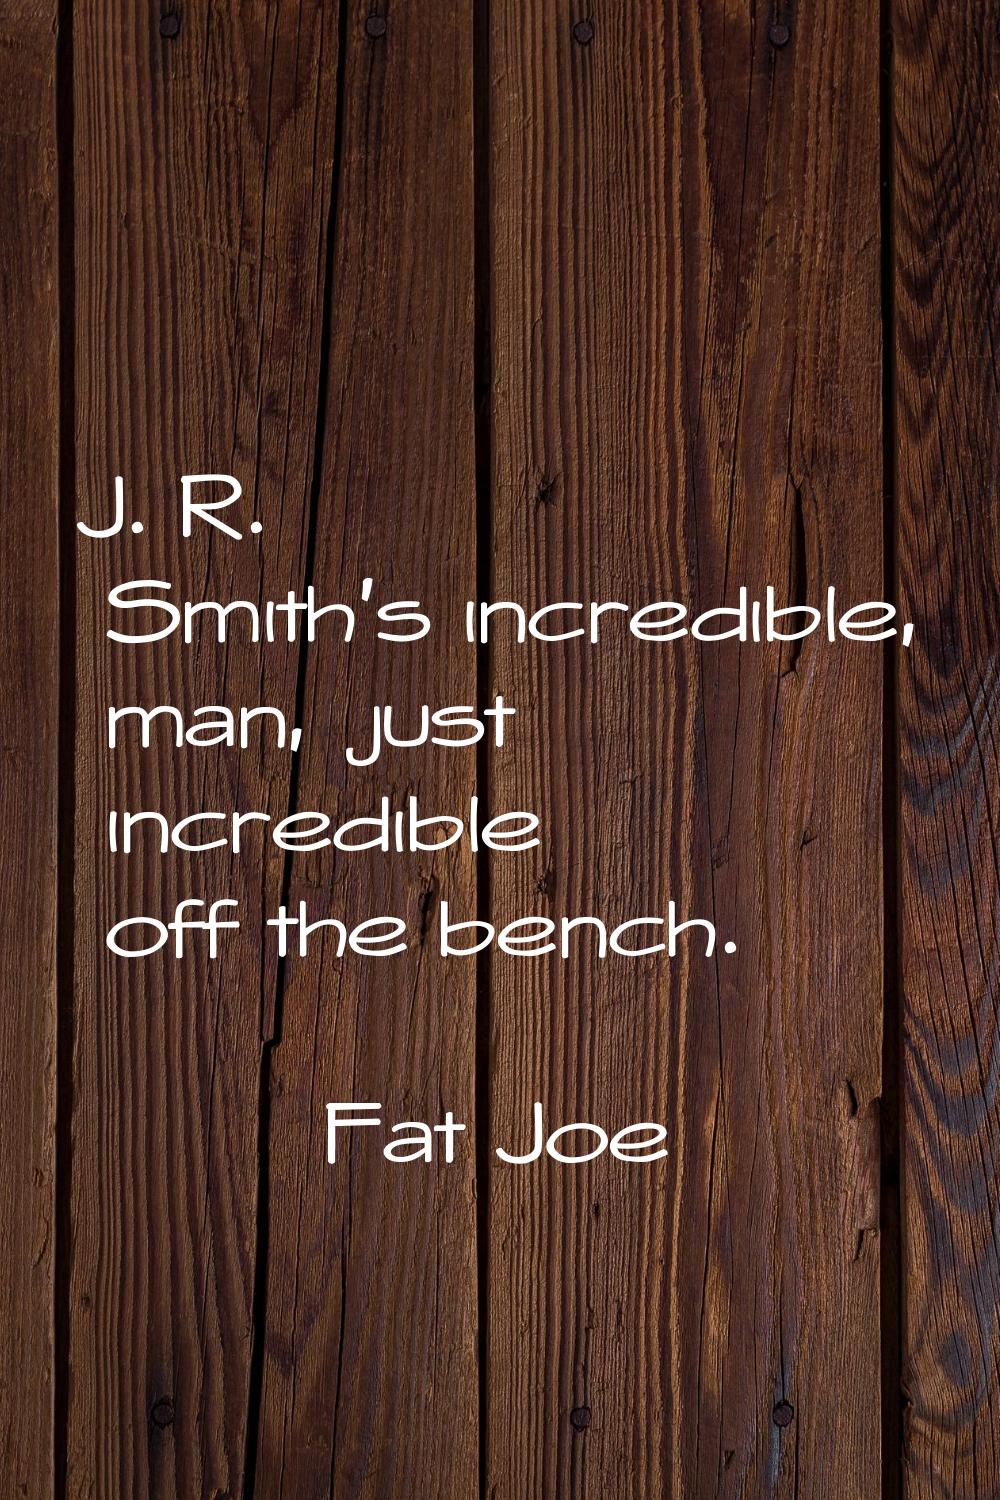 J. R. Smith's incredible, man, just incredible off the bench.